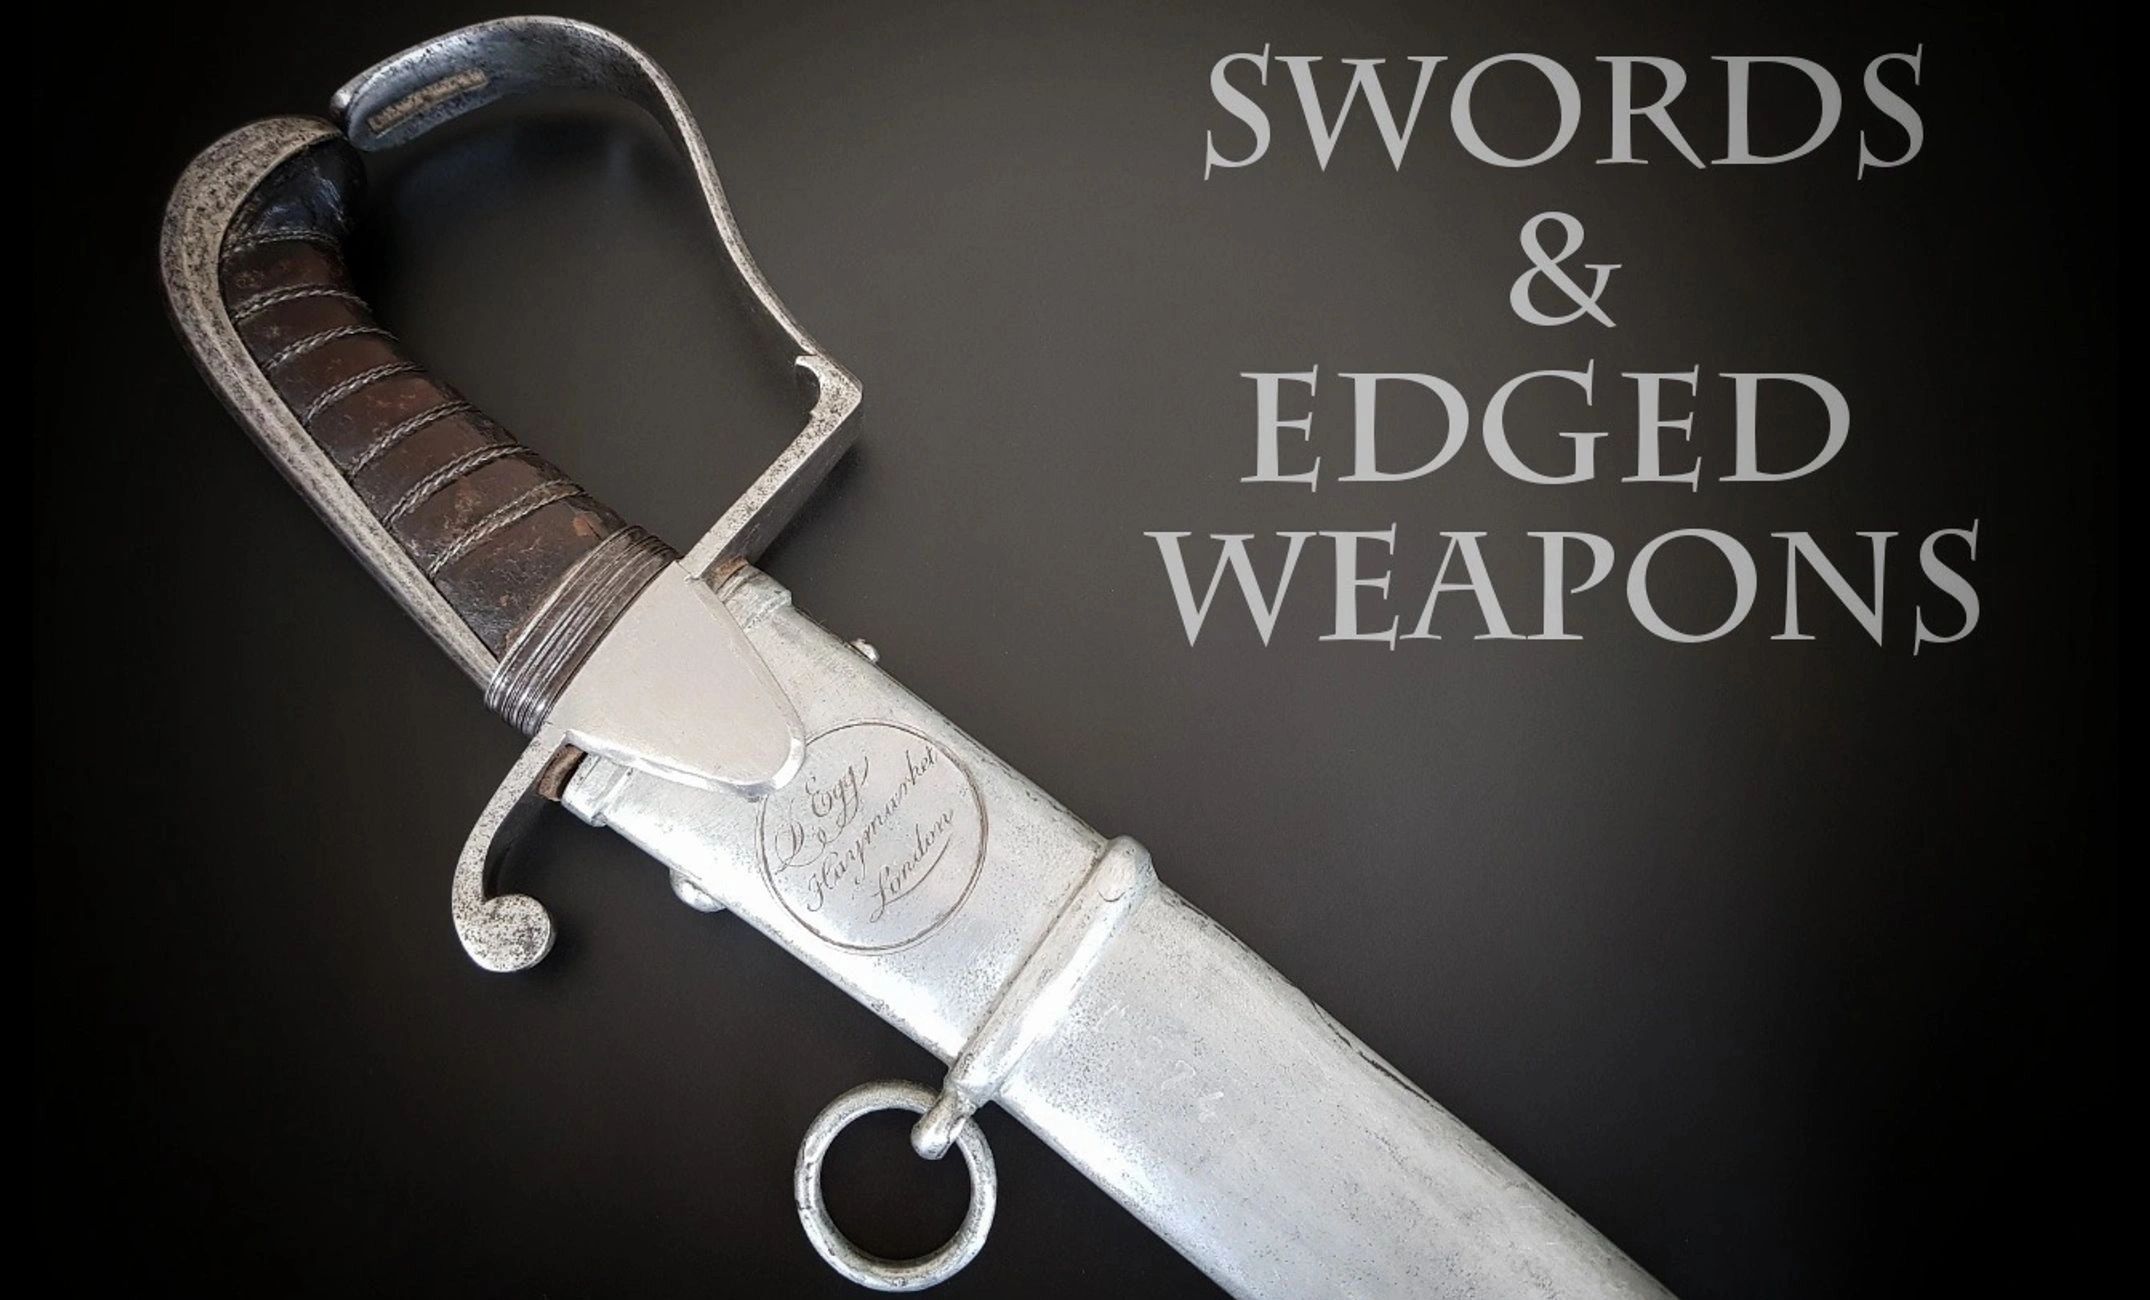 Cavalry Sword by Durs Egg of Haymarket, London with Scabbard